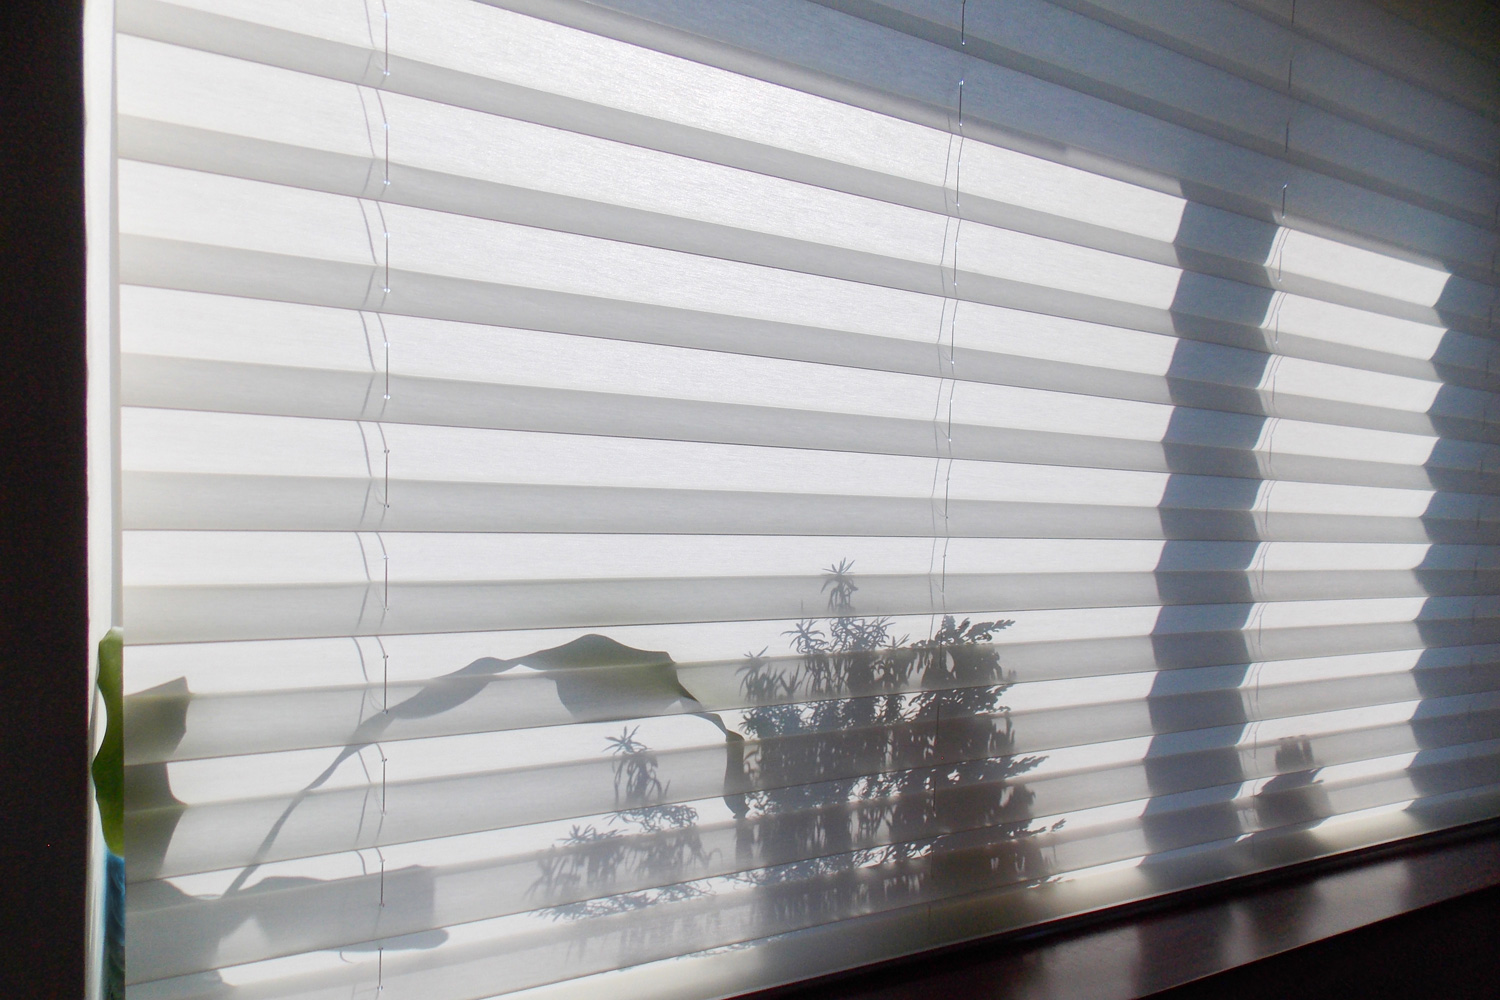 Pleated blinds XL Coulisse, white color, with 50mm fold closeup in the window opening. On the windowsill behind pleated shades, shadows of indoor plants shine through. Modern home curtains closed.